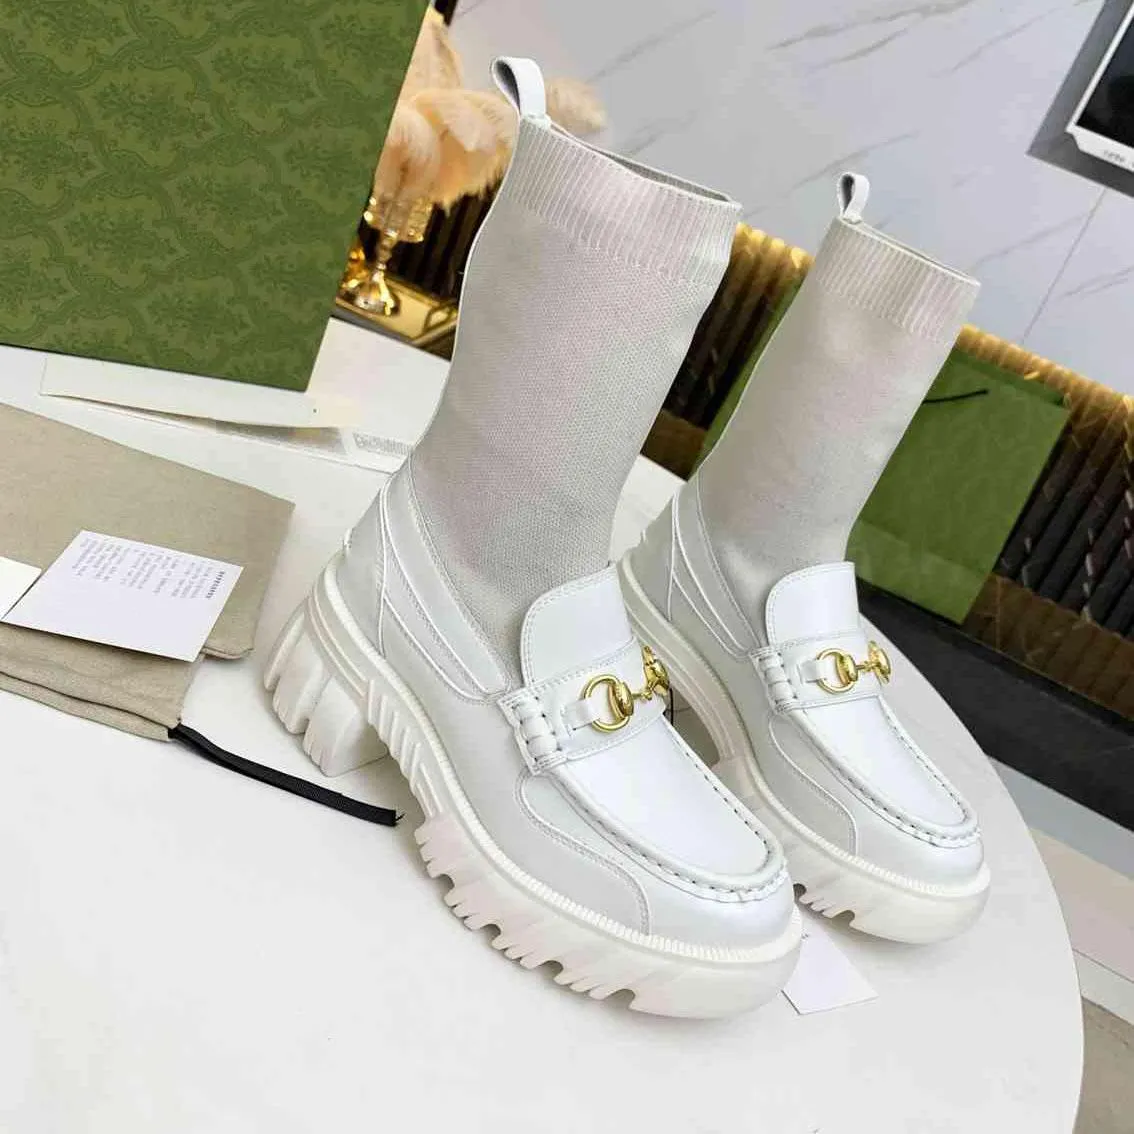 Designer Women Boots Bee Thick Sole Platform 5CM Socks Shoes Ladies Title Buckle Horse Short Ankle Boot Cowhide Genuine Leather Diamonds High Top Shoe 35-41